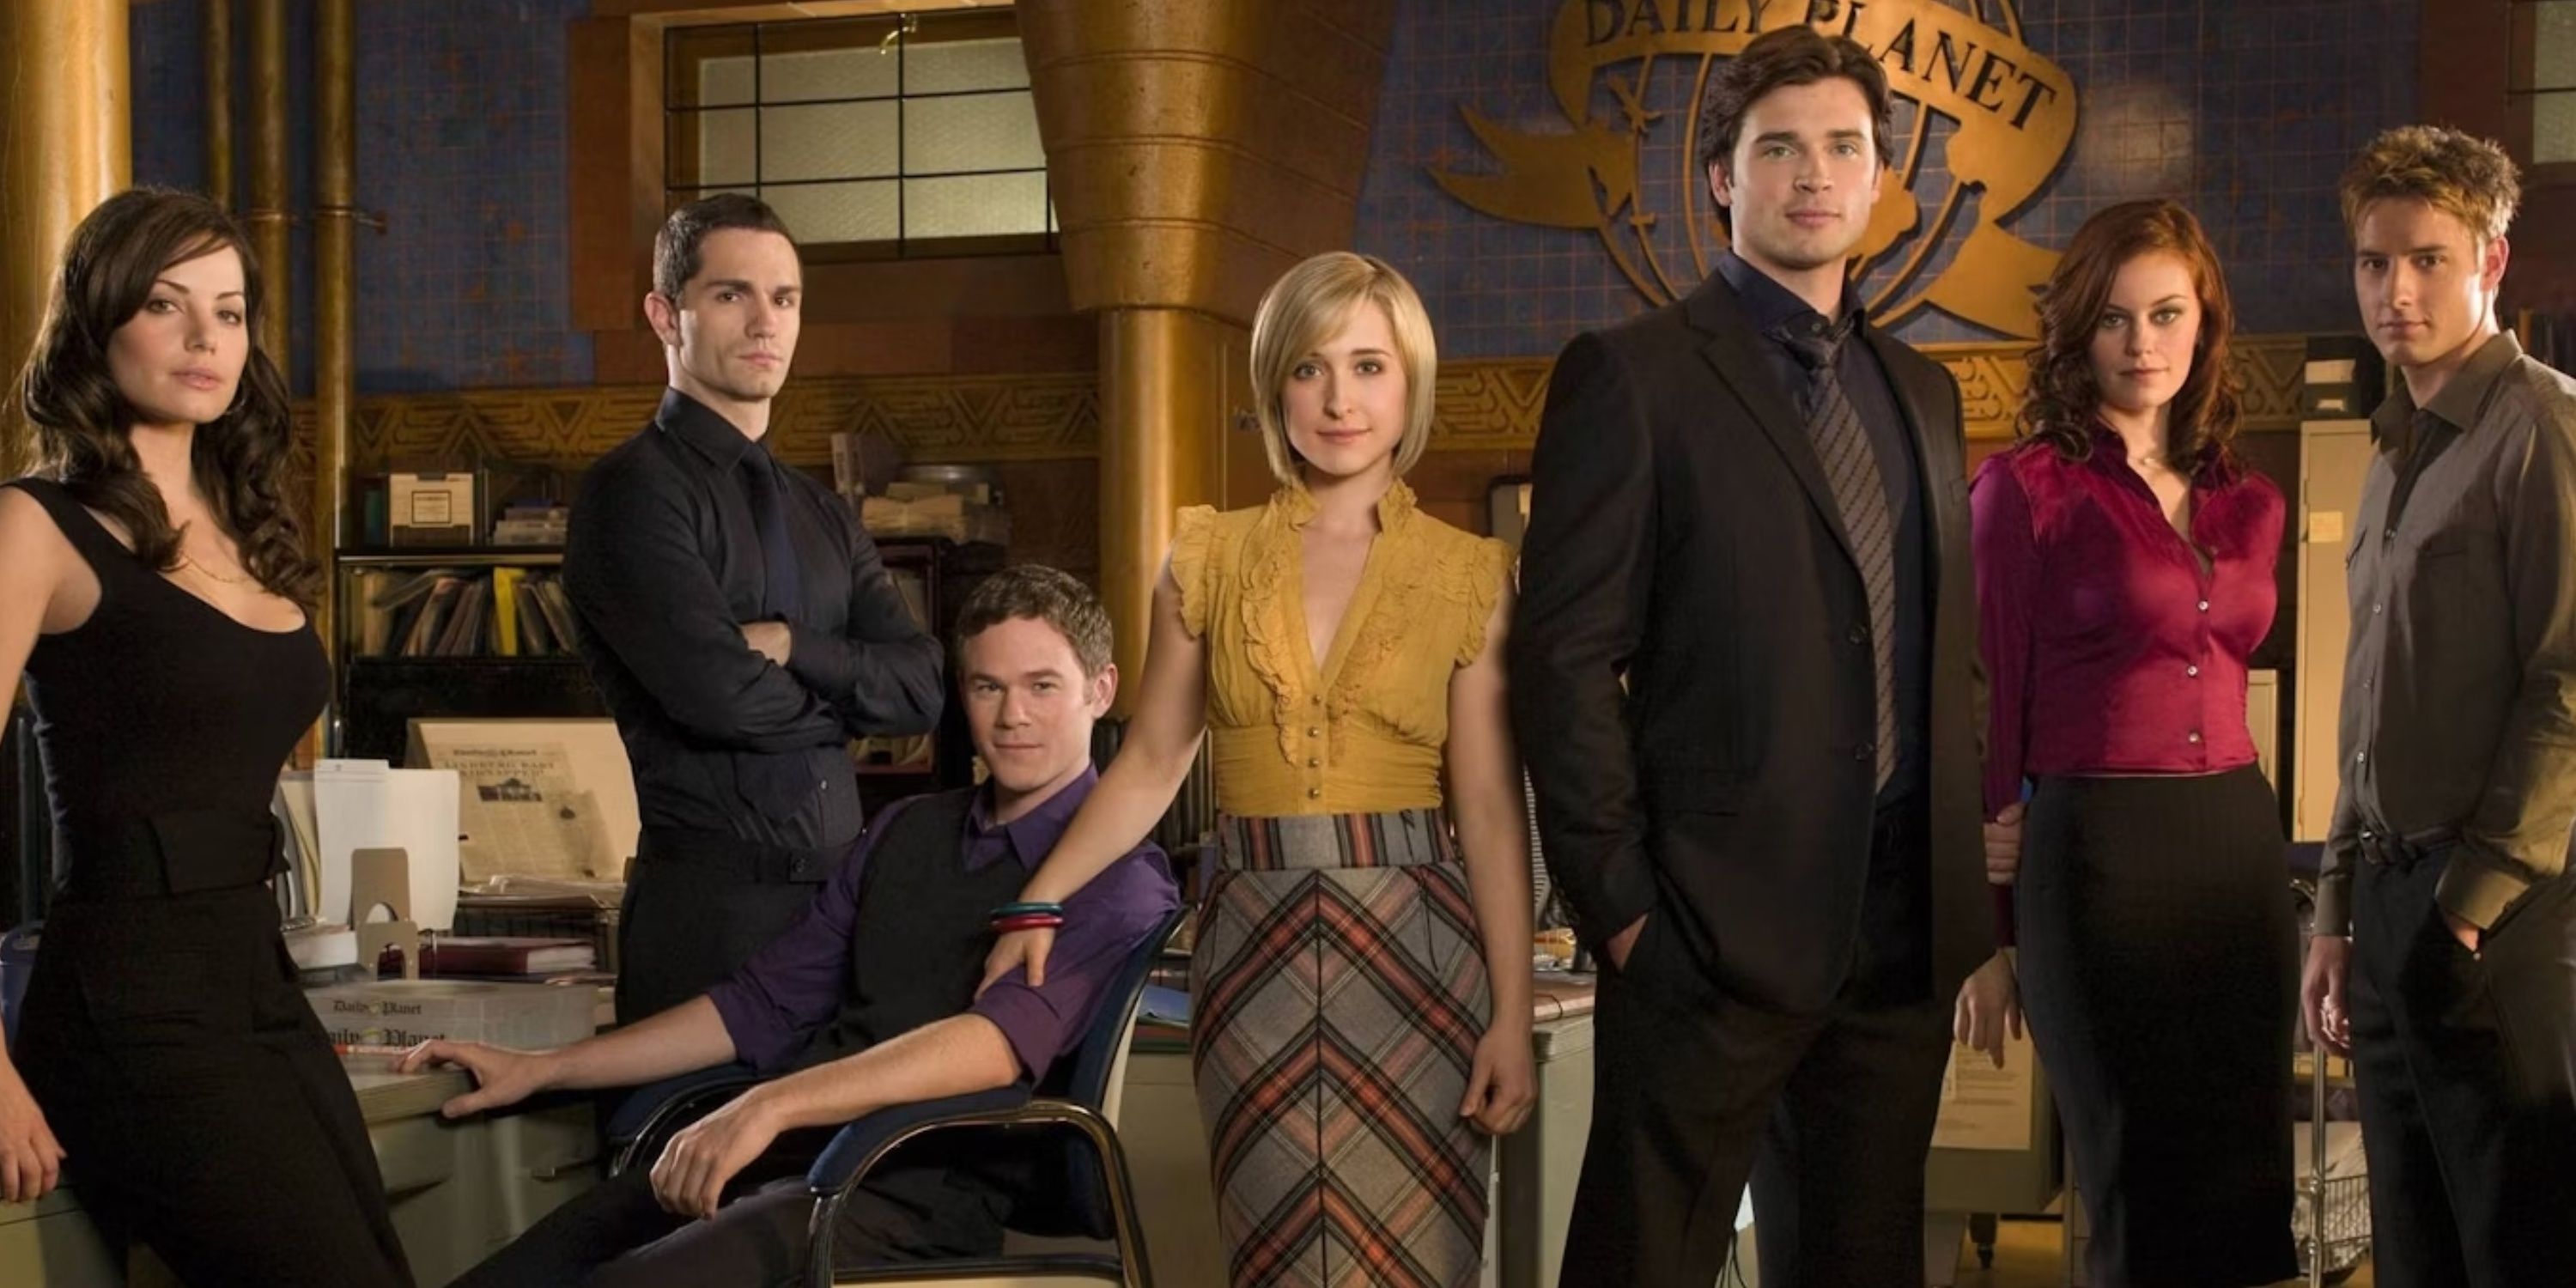 The cast of Smallville stands inside the Daily Planet office